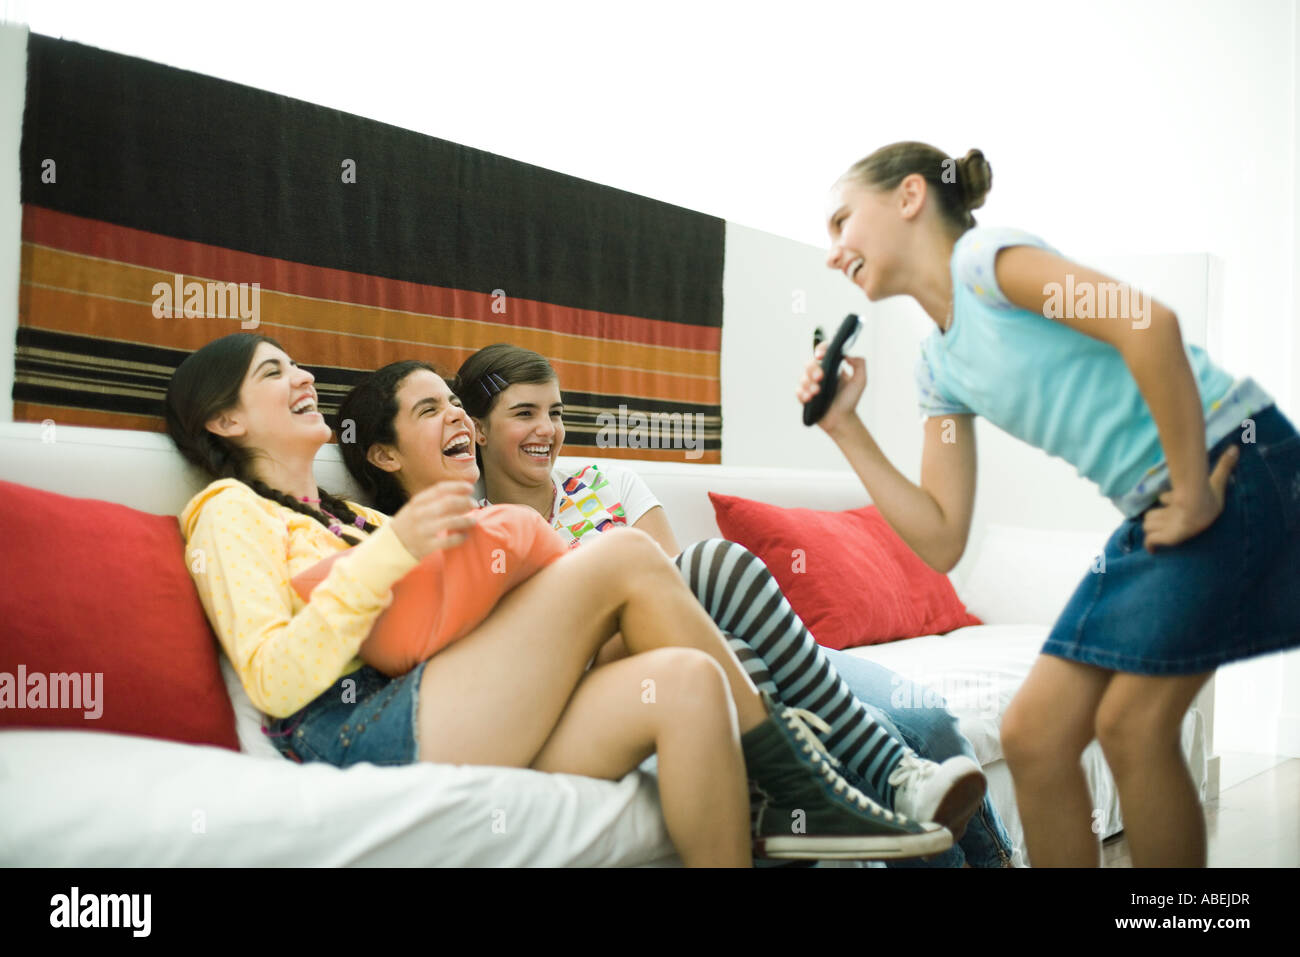 Preteen girl singing into remote control, friends laughing Stock Photo